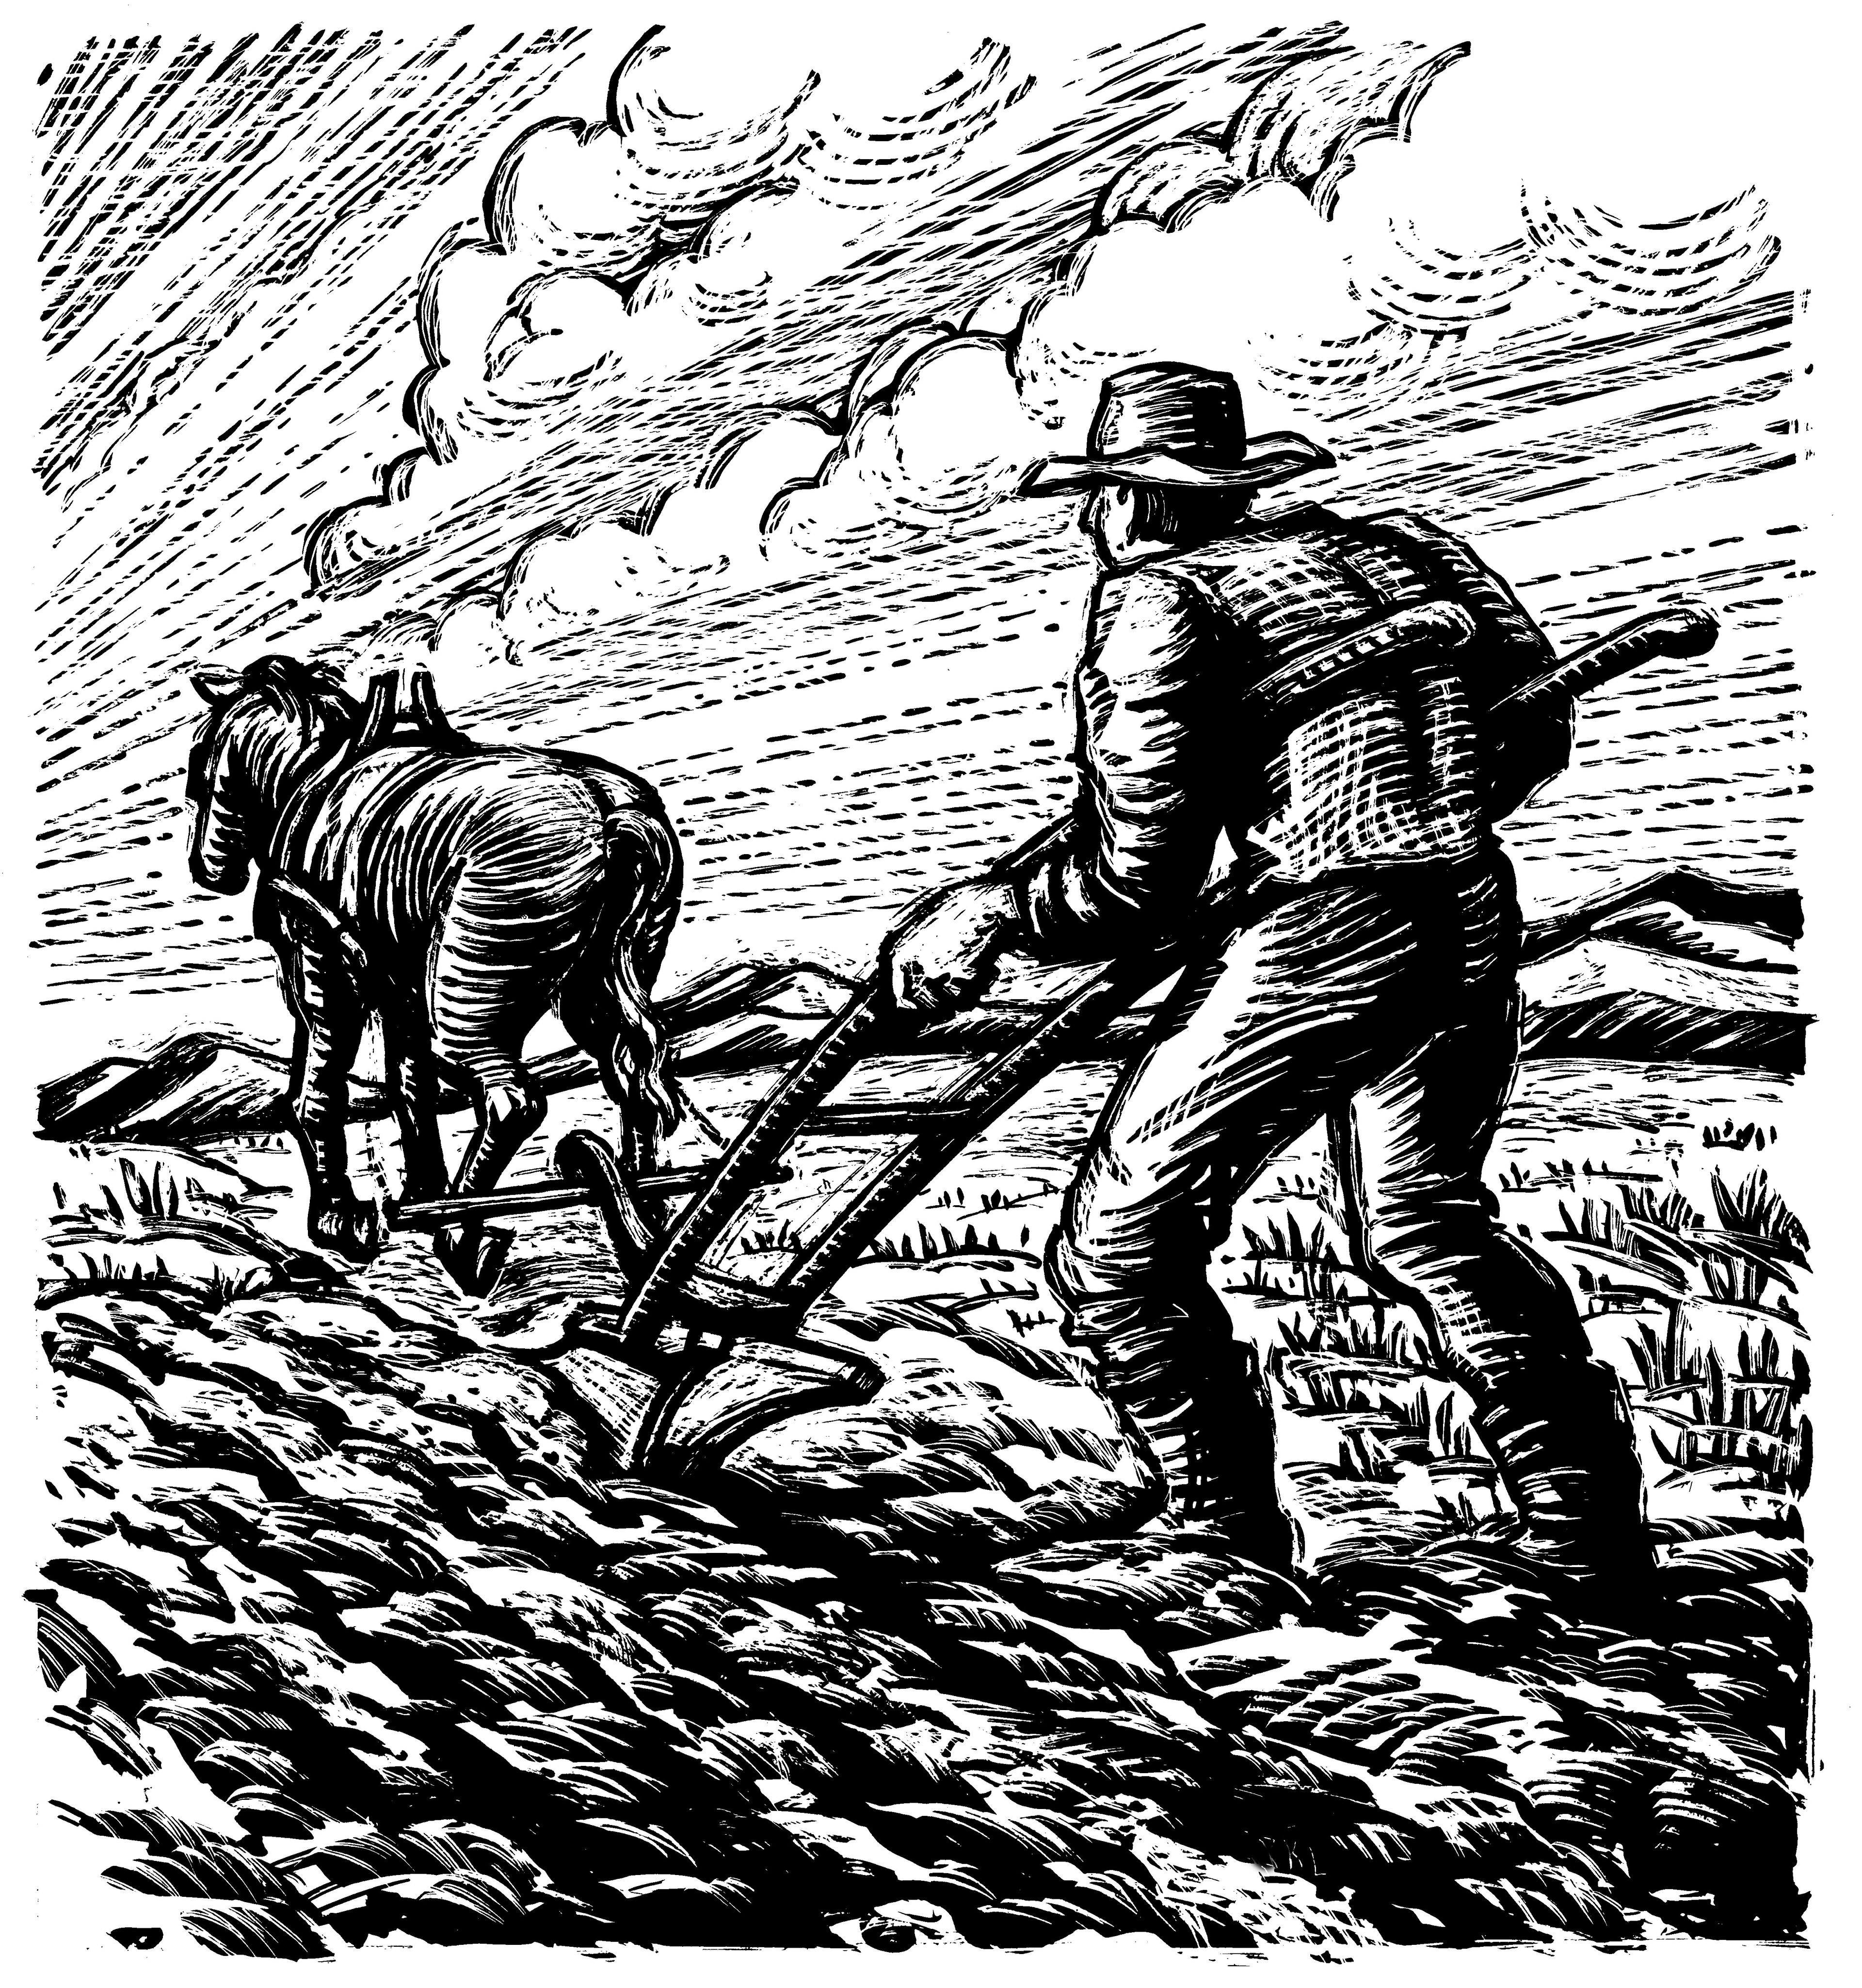 An illustration of a man plowing a field.